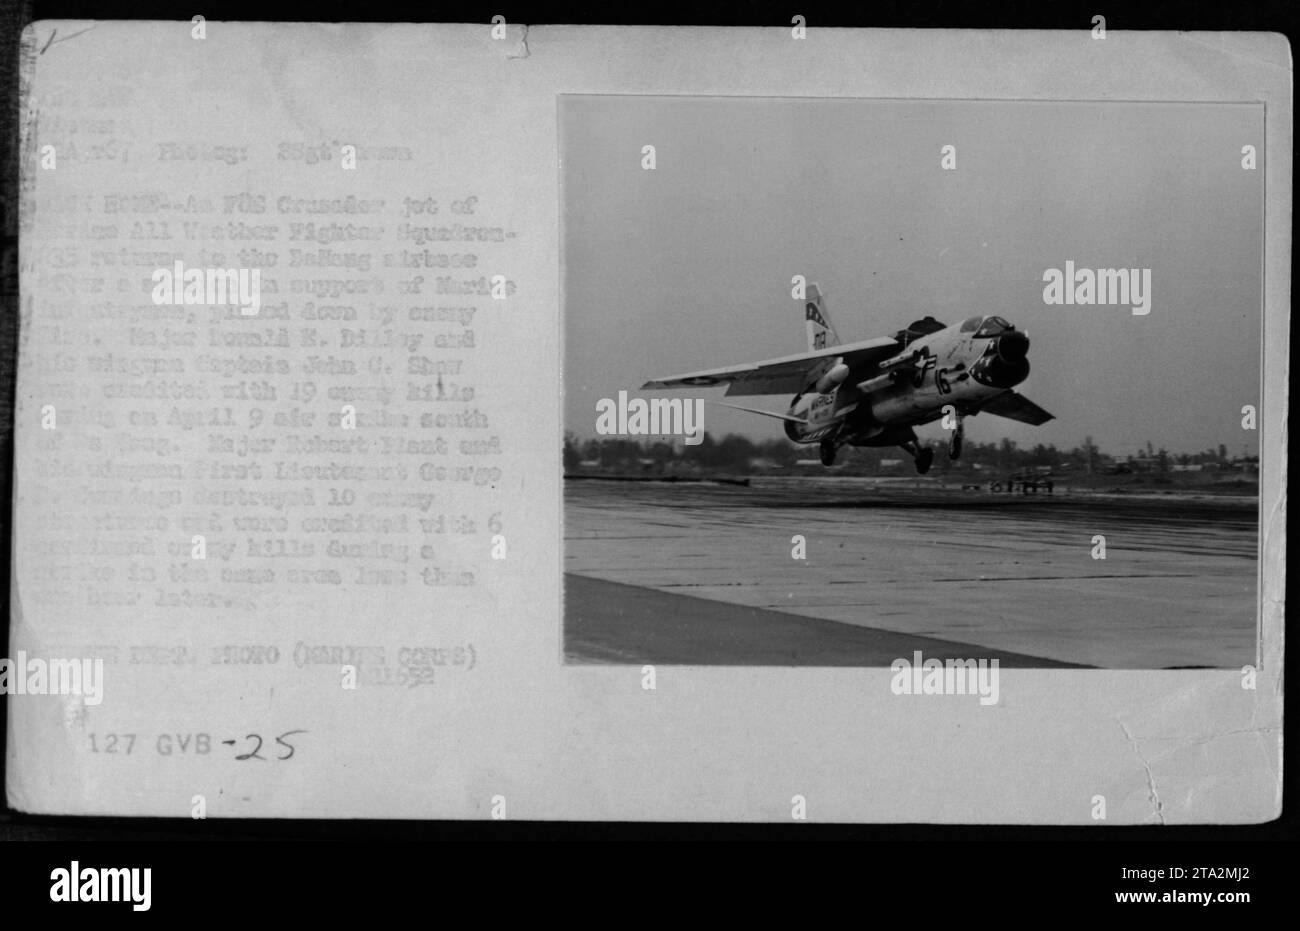 F-8 Crusader jet of All Weather Fighter Squadron returns to DaNang airbase after supporting Marine infantrymen. Major Donald K. Dilley, Captain John C. Shaw, Major Robert Plant, and First Lieutenant George [last names illegible] credited with enemy kills on April 9 air strike. Image from Vietnam, dated April 12, 1967. Defense Department photo, Marine Corps. Stock Photo